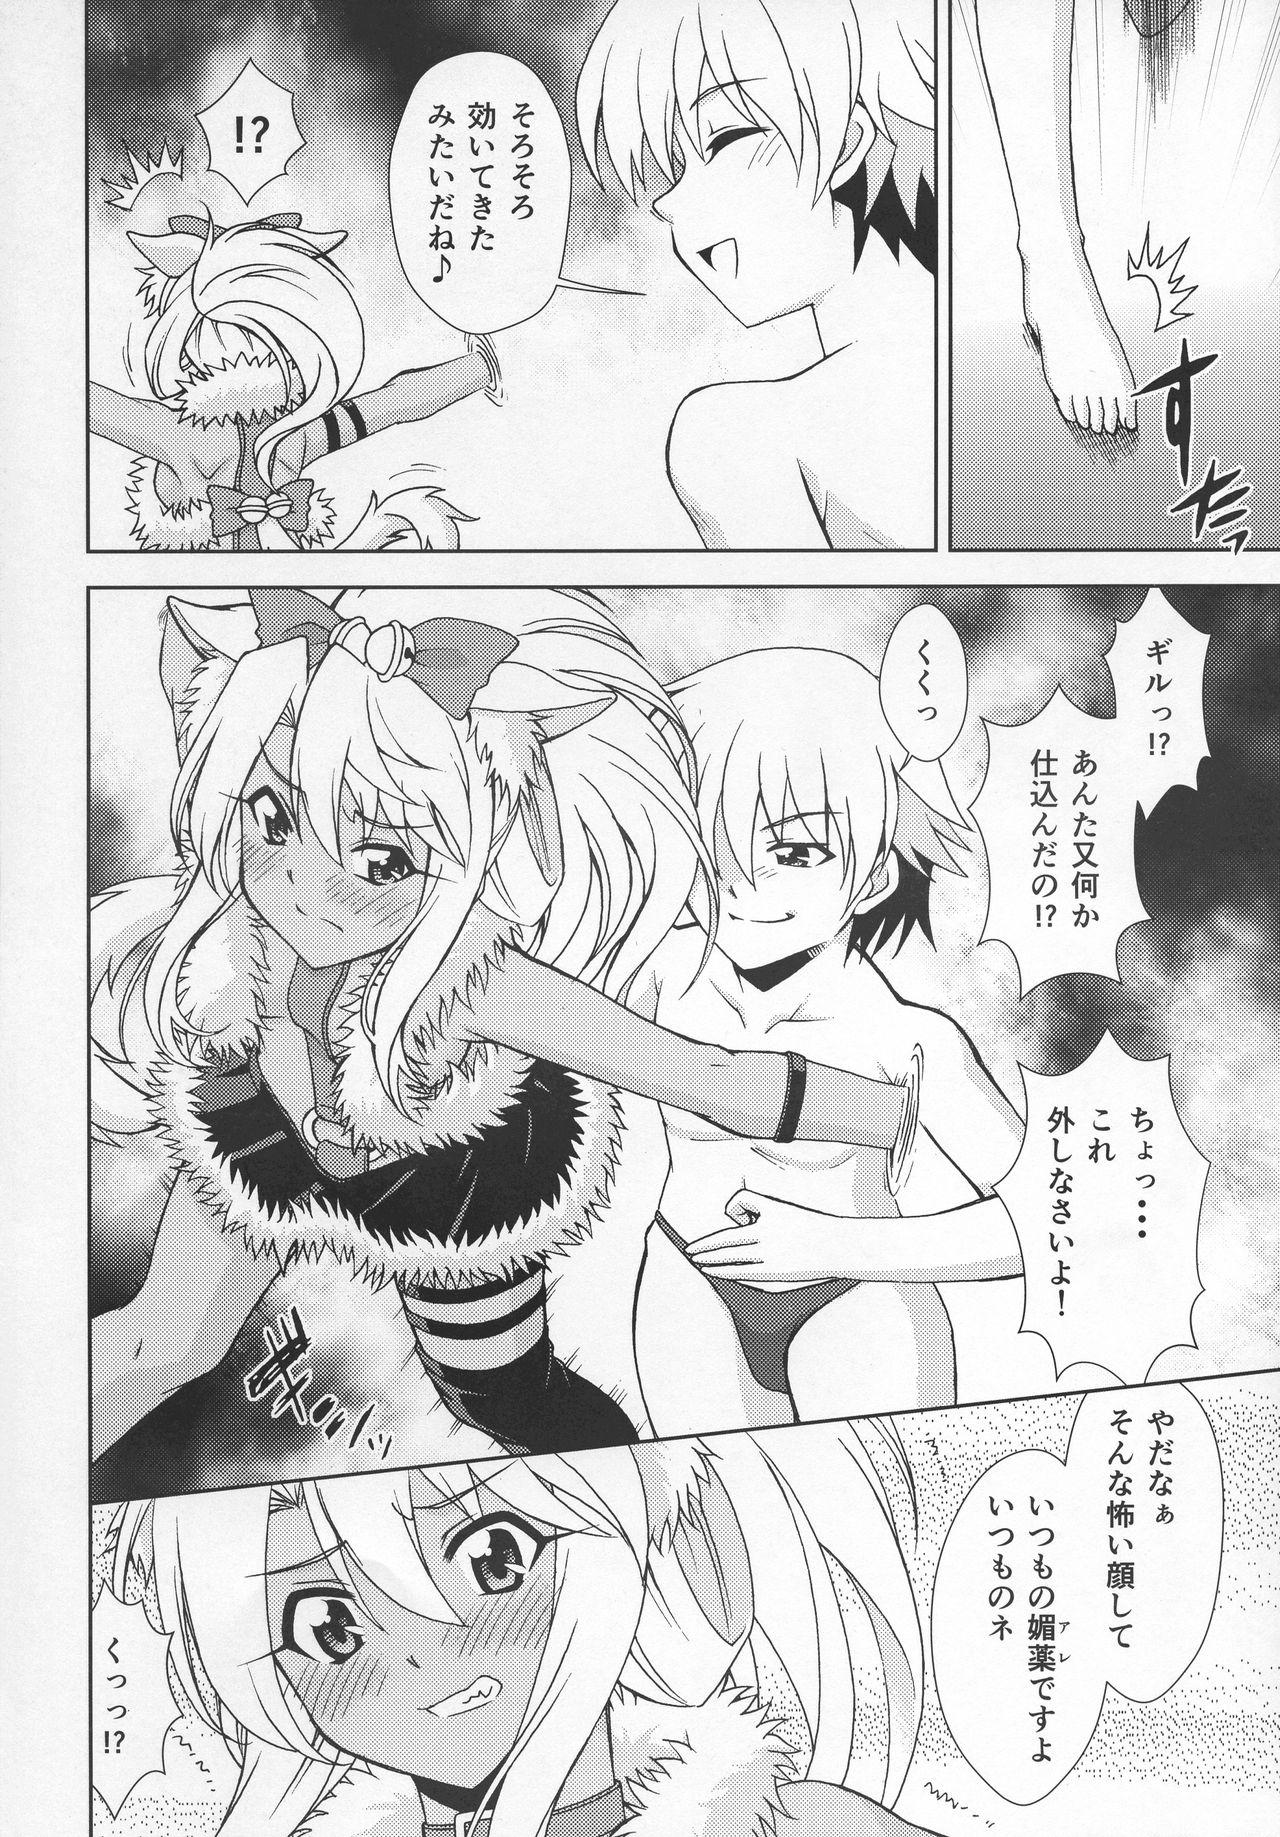 Magrinha PRISMA☆BEAST - Fate grand order Friends - Page 8